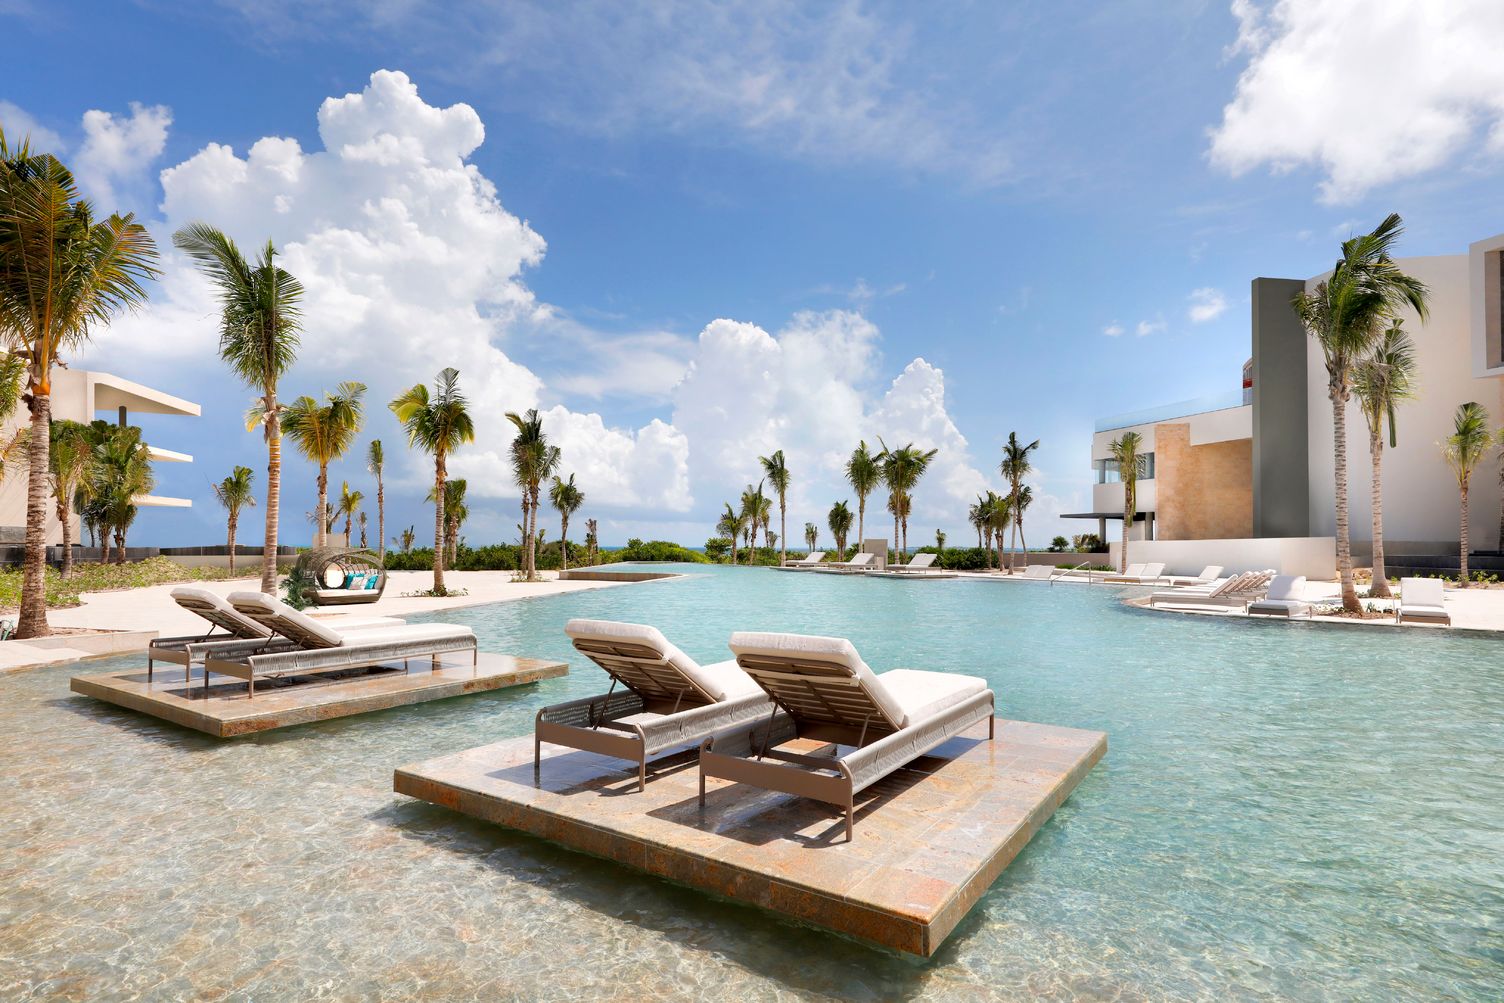 Pool deck at TRS Coral in Costa Mujeres